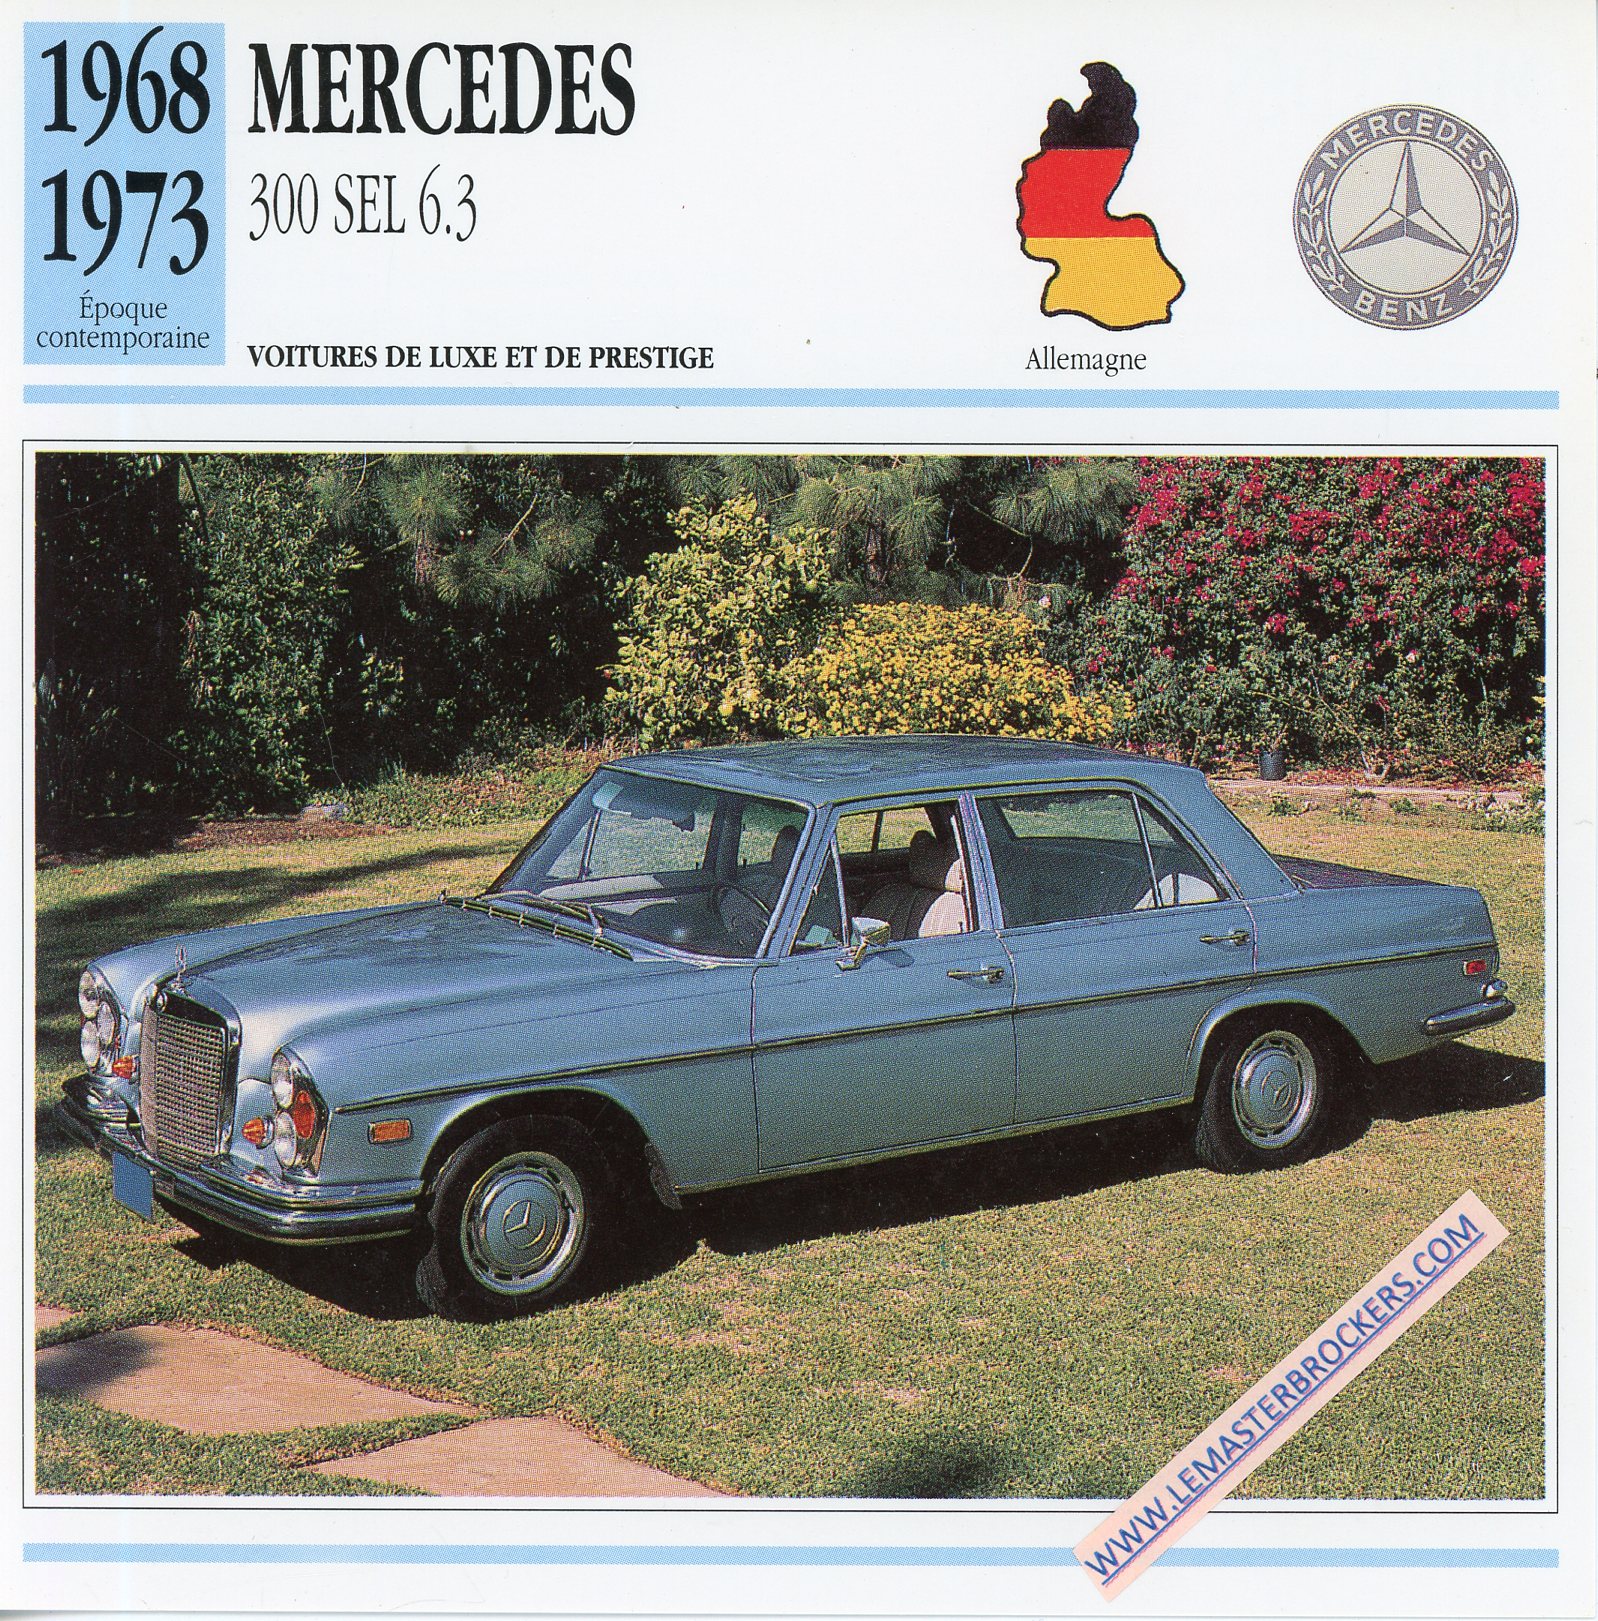 FICHE-AUTO-MERCEDES-300SEL-300-SEL-1968-1975-LEMASTERBROCKERS-CARD-CARS